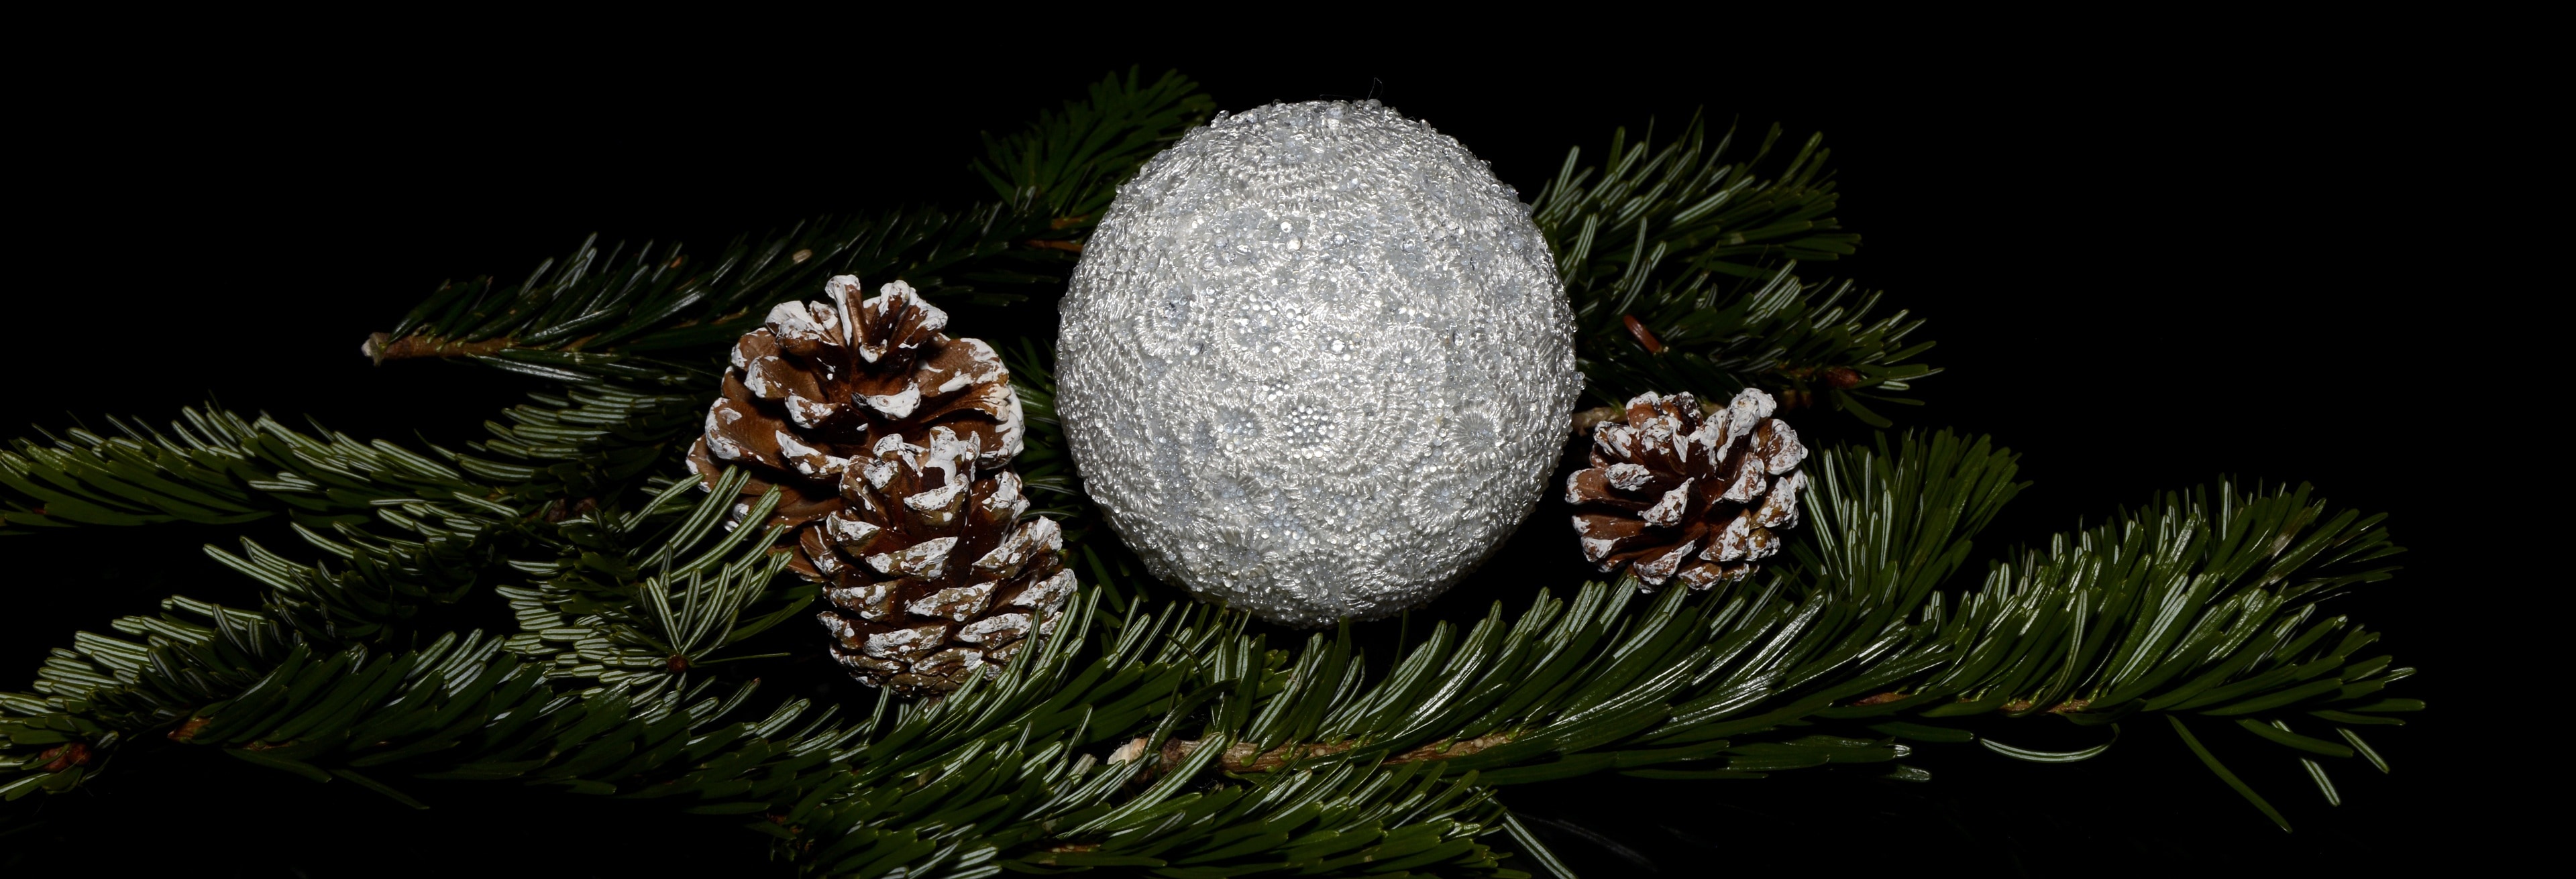 white bauble and 2 brown pine cones